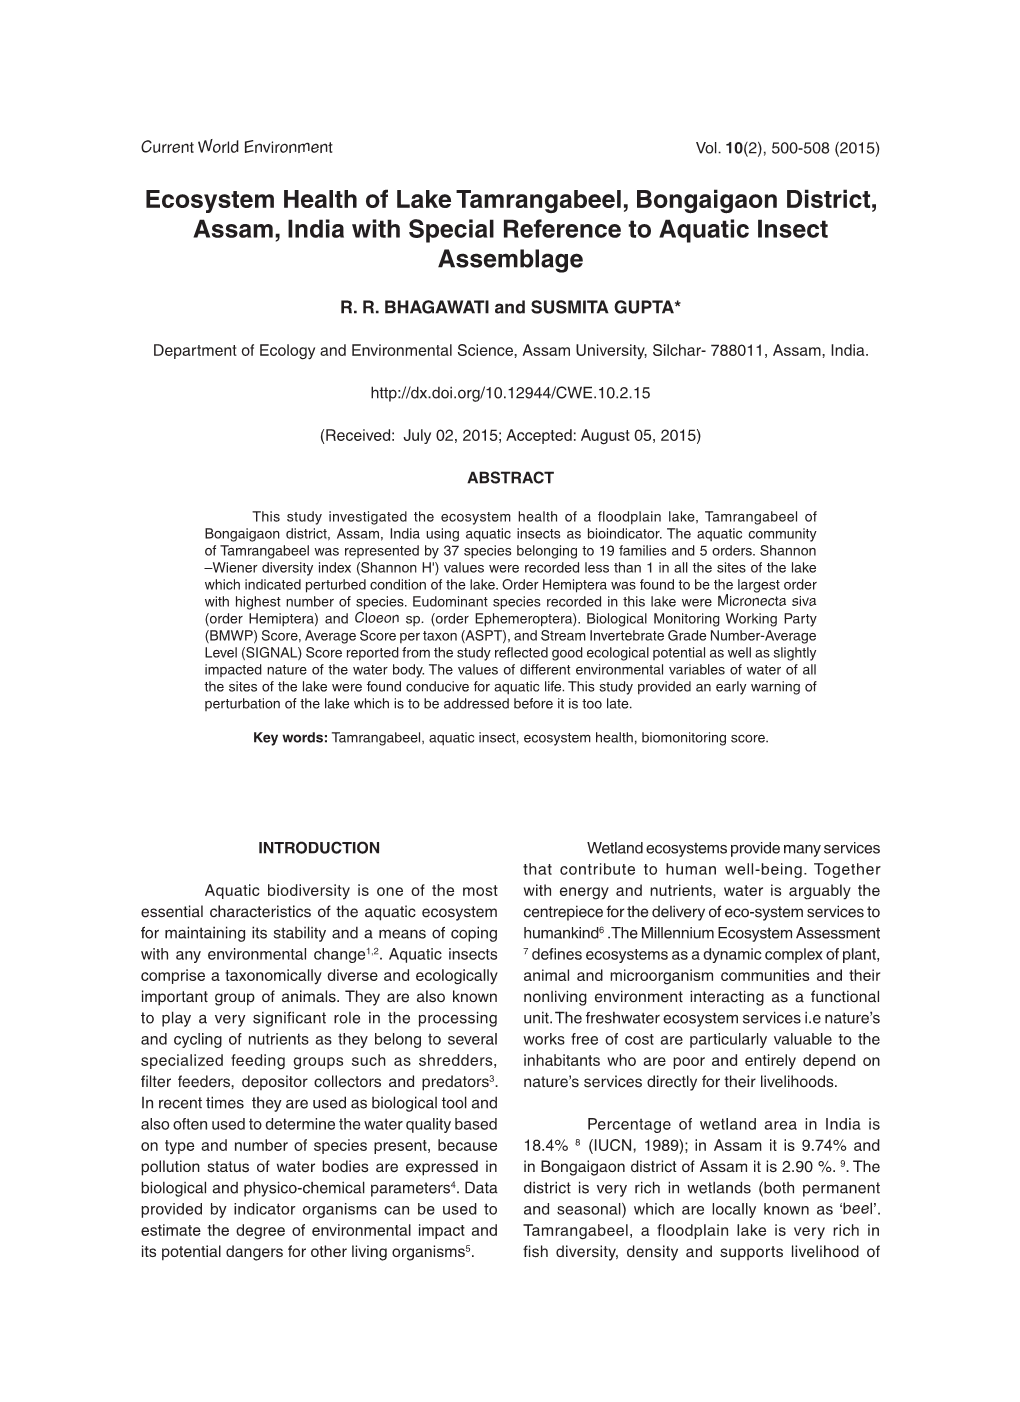 Ecosystem Health of Lake Tamrangabeel, Bongaigaon District, Assam, India with Special Reference to Aquatic Insect Assemblage